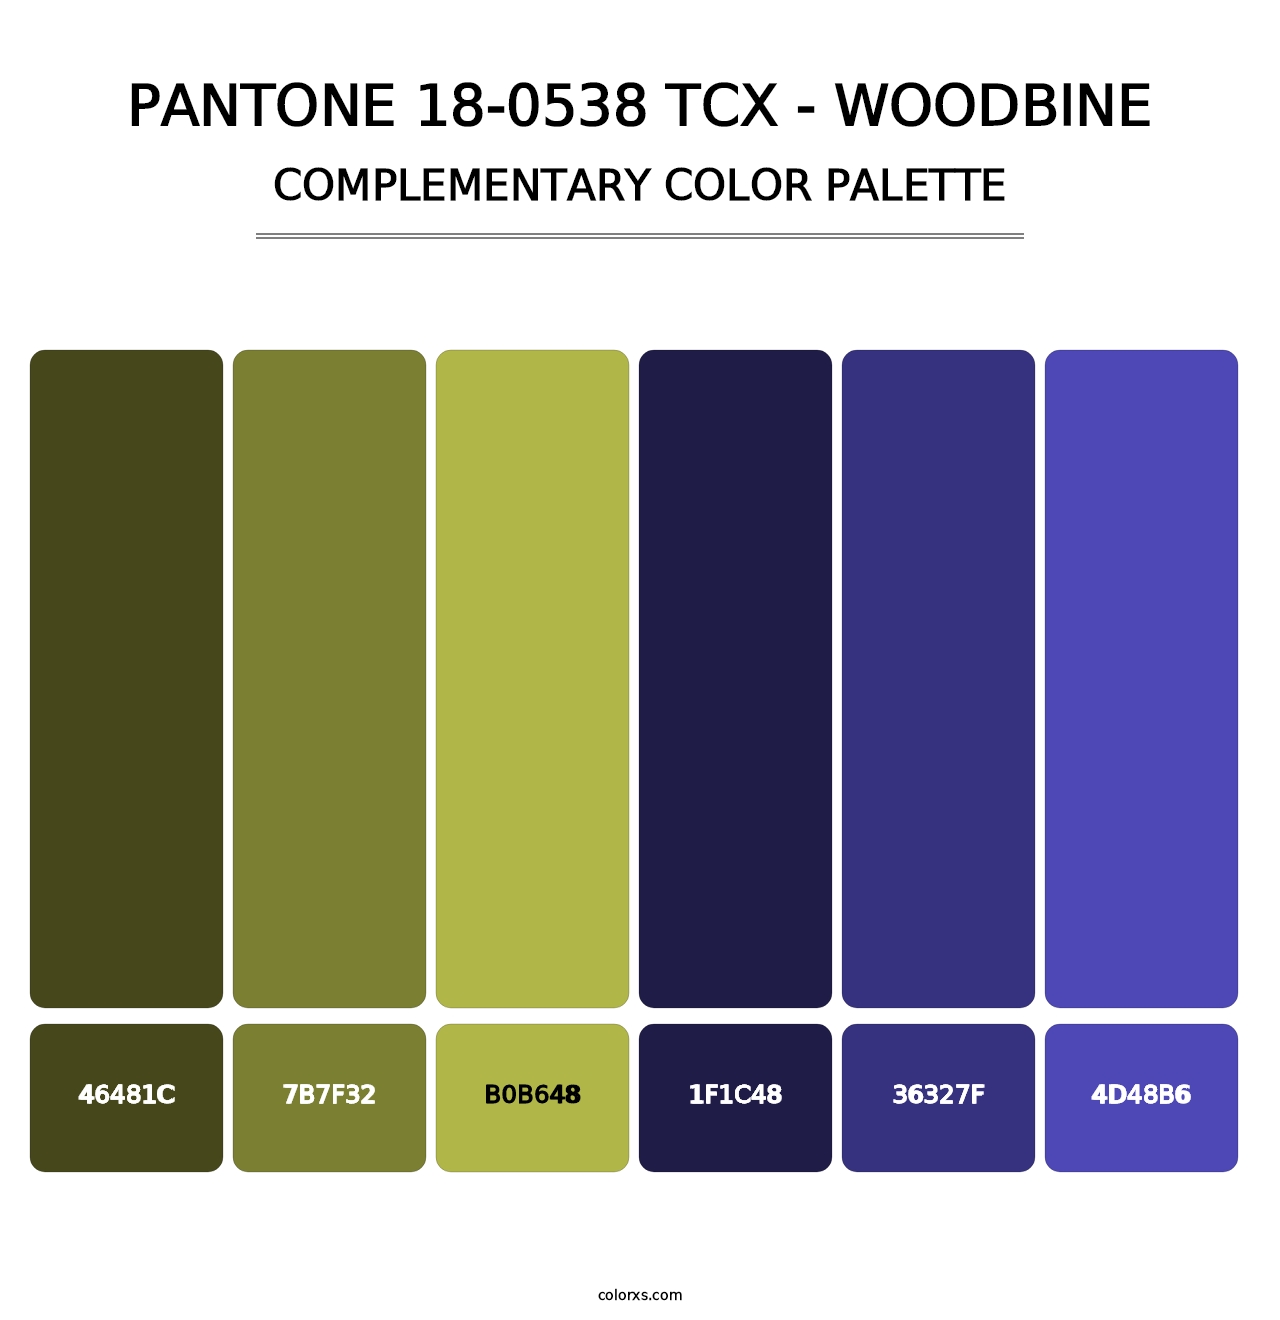 PANTONE 18-0538 TCX - Woodbine - Complementary Color Palette